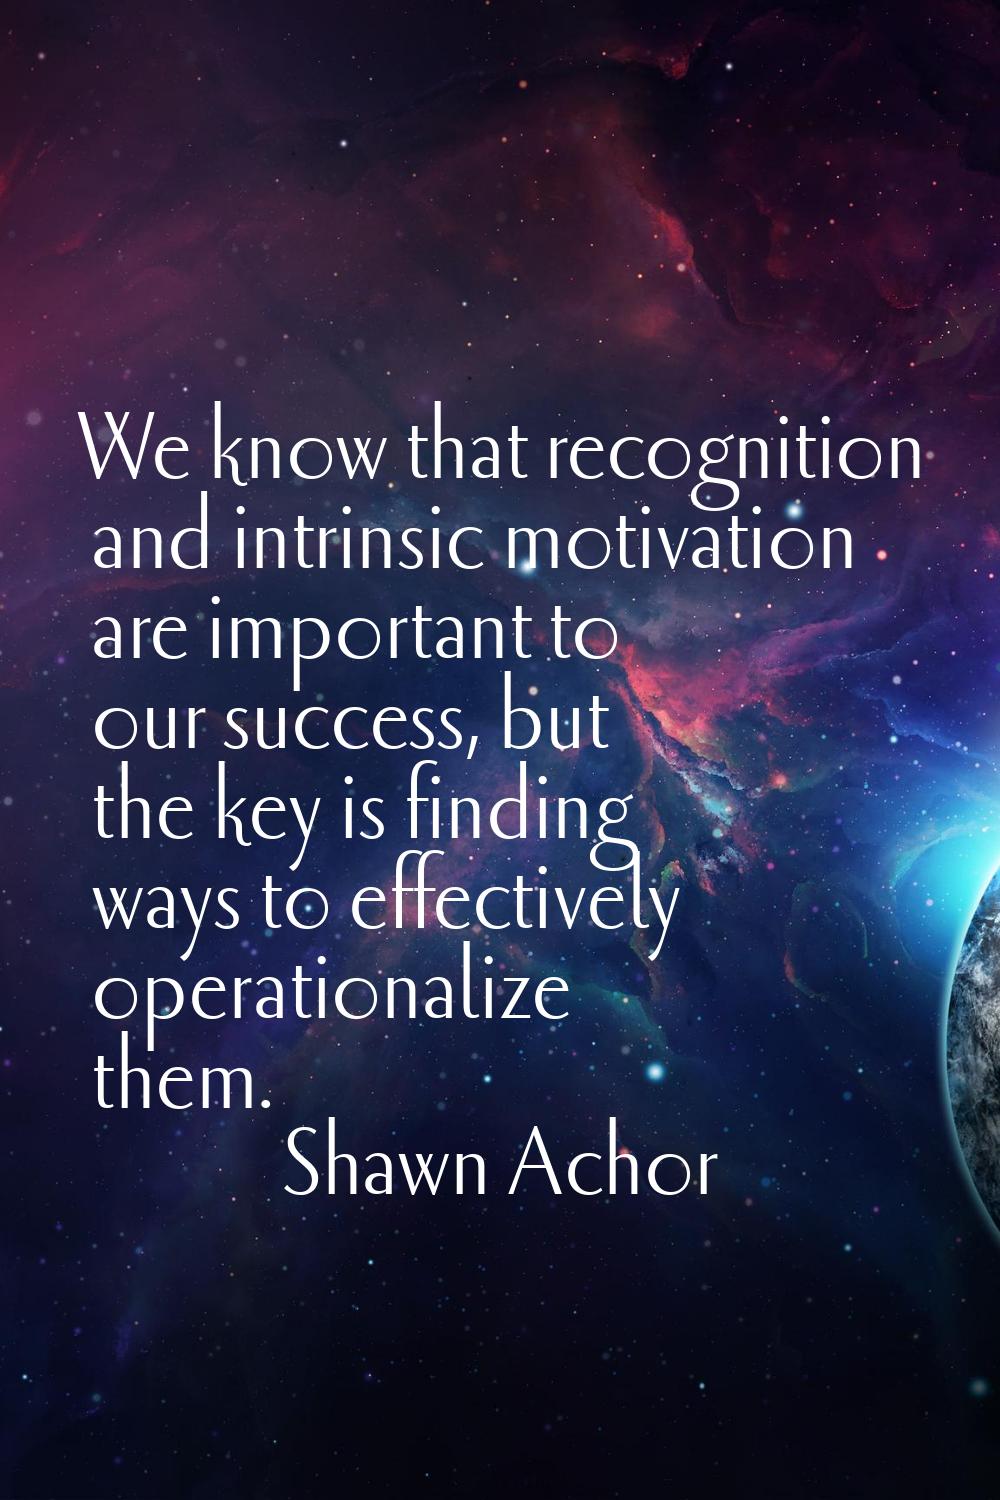 We know that recognition and intrinsic motivation are important to our success, but the key is find